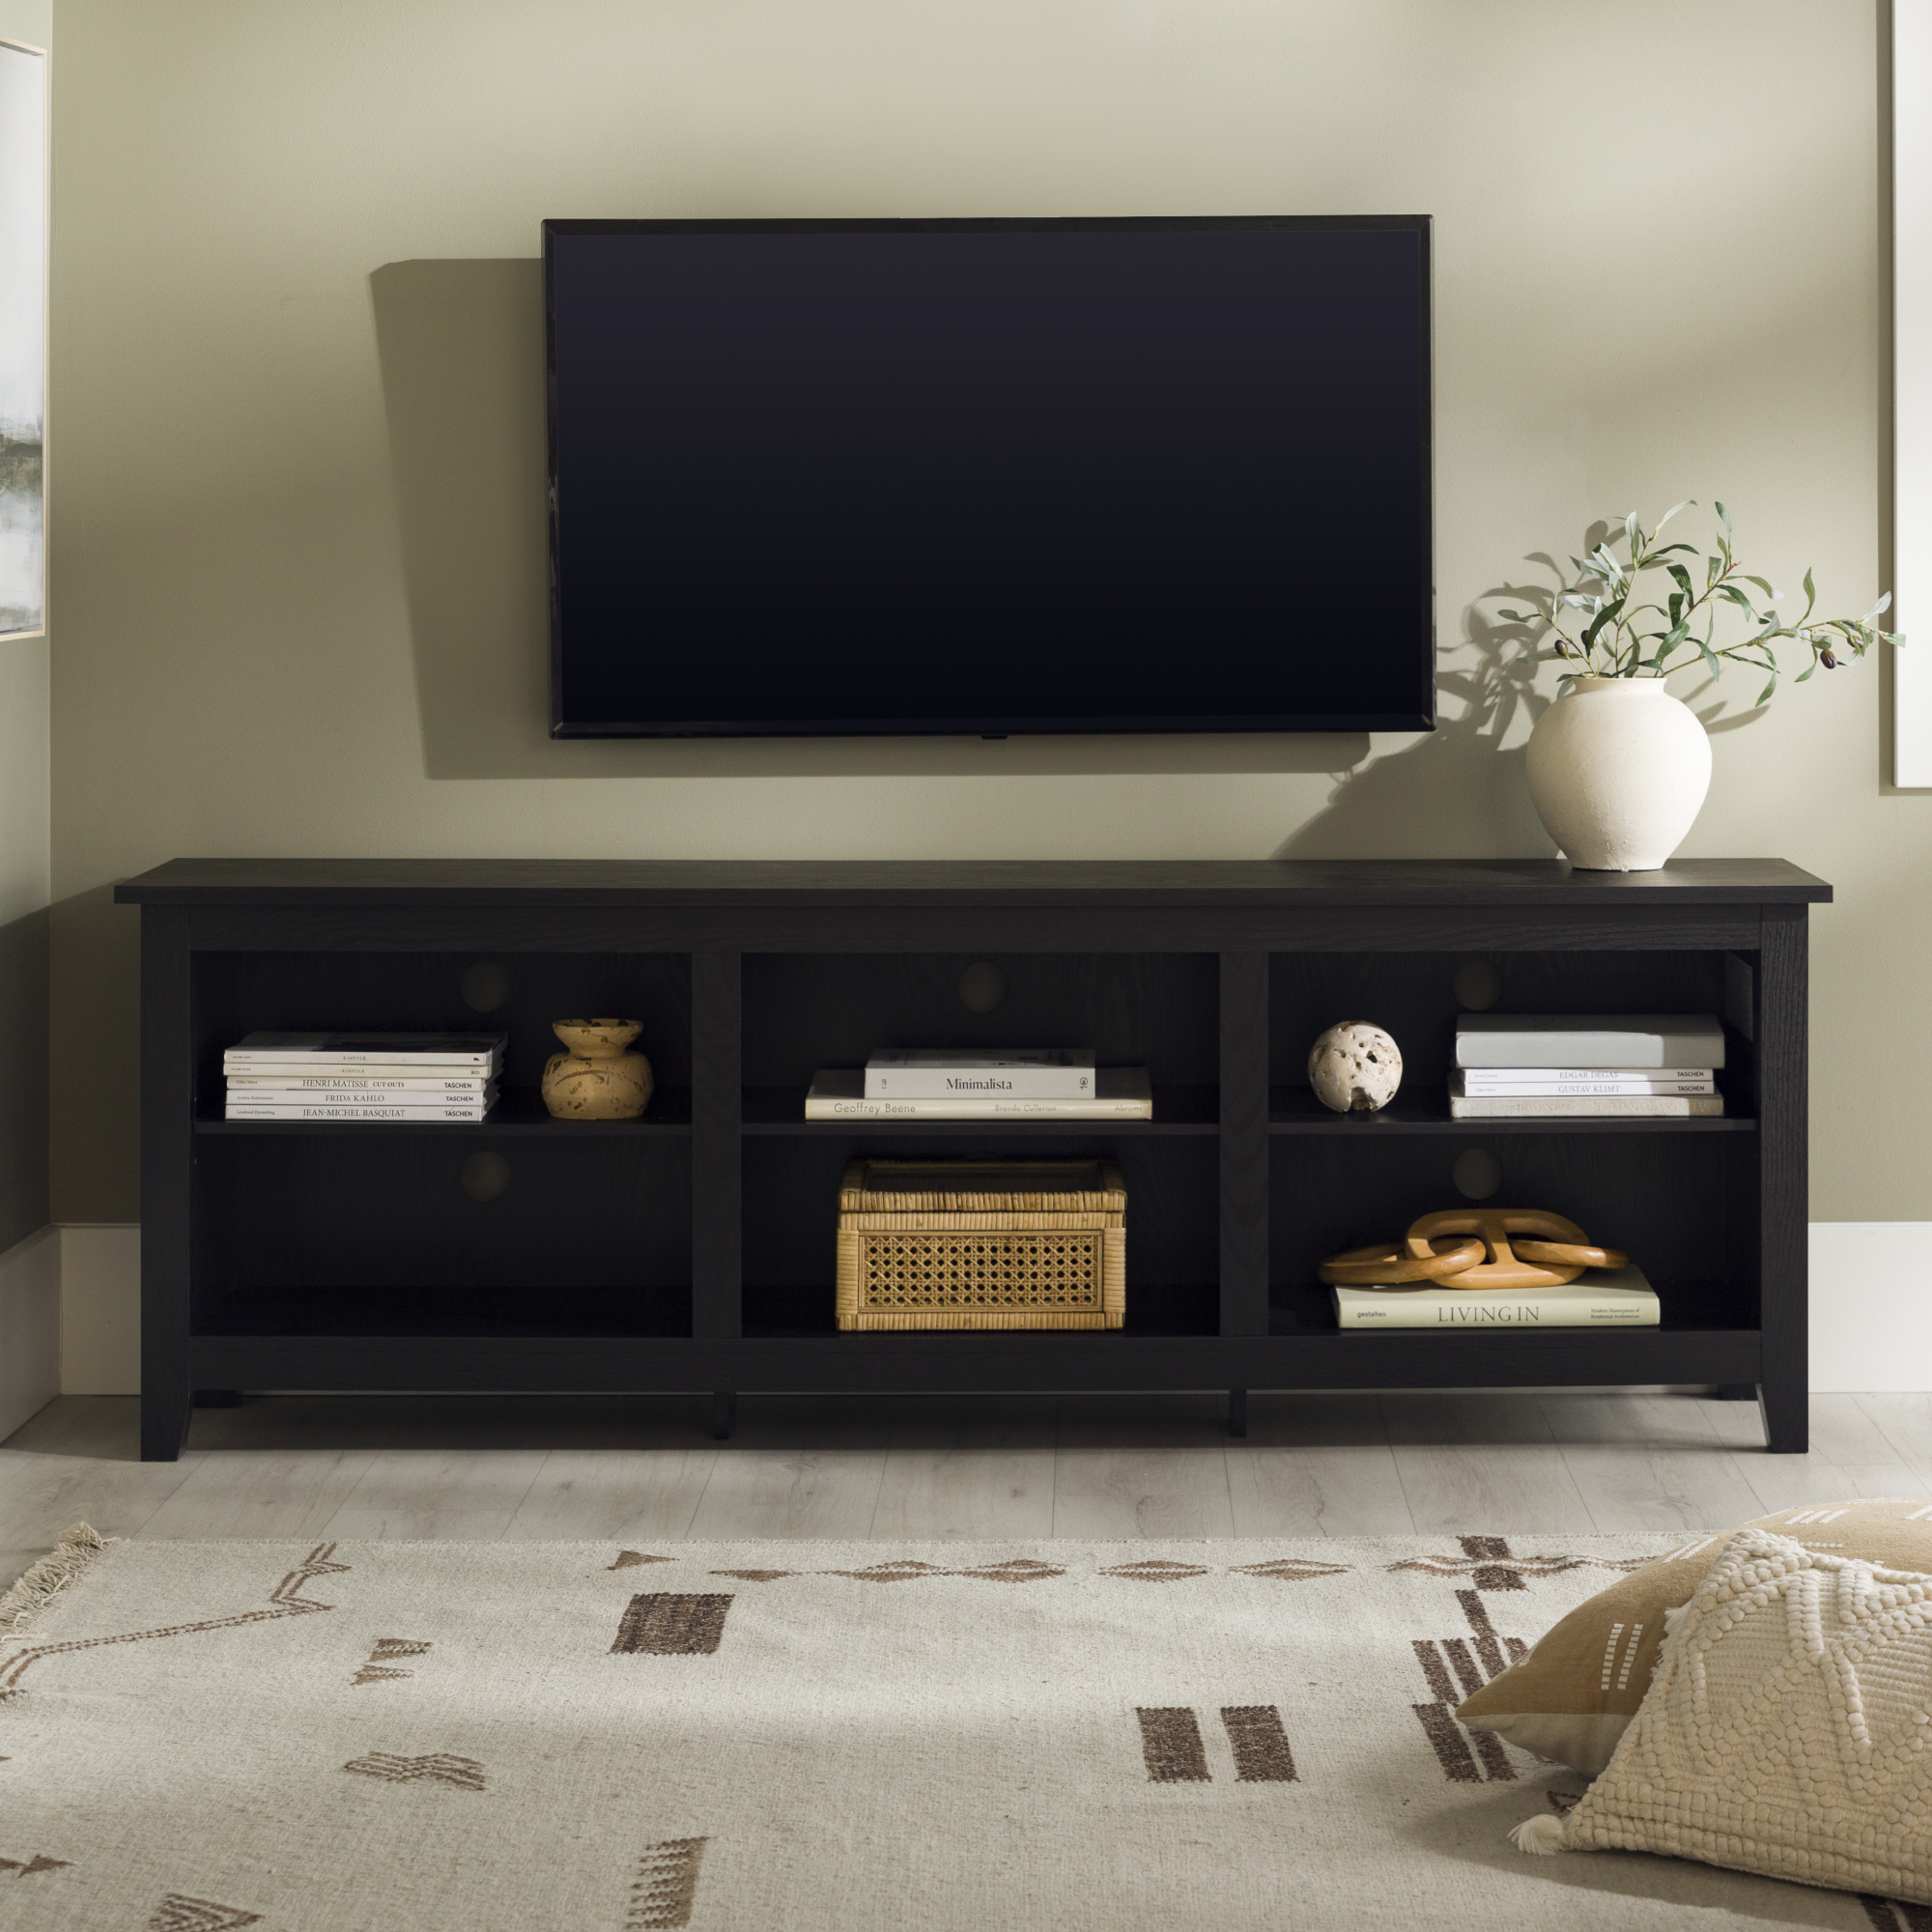 Woven Paths Open Storage TV Stand for TVs up to 80", Black - image 1 of 14